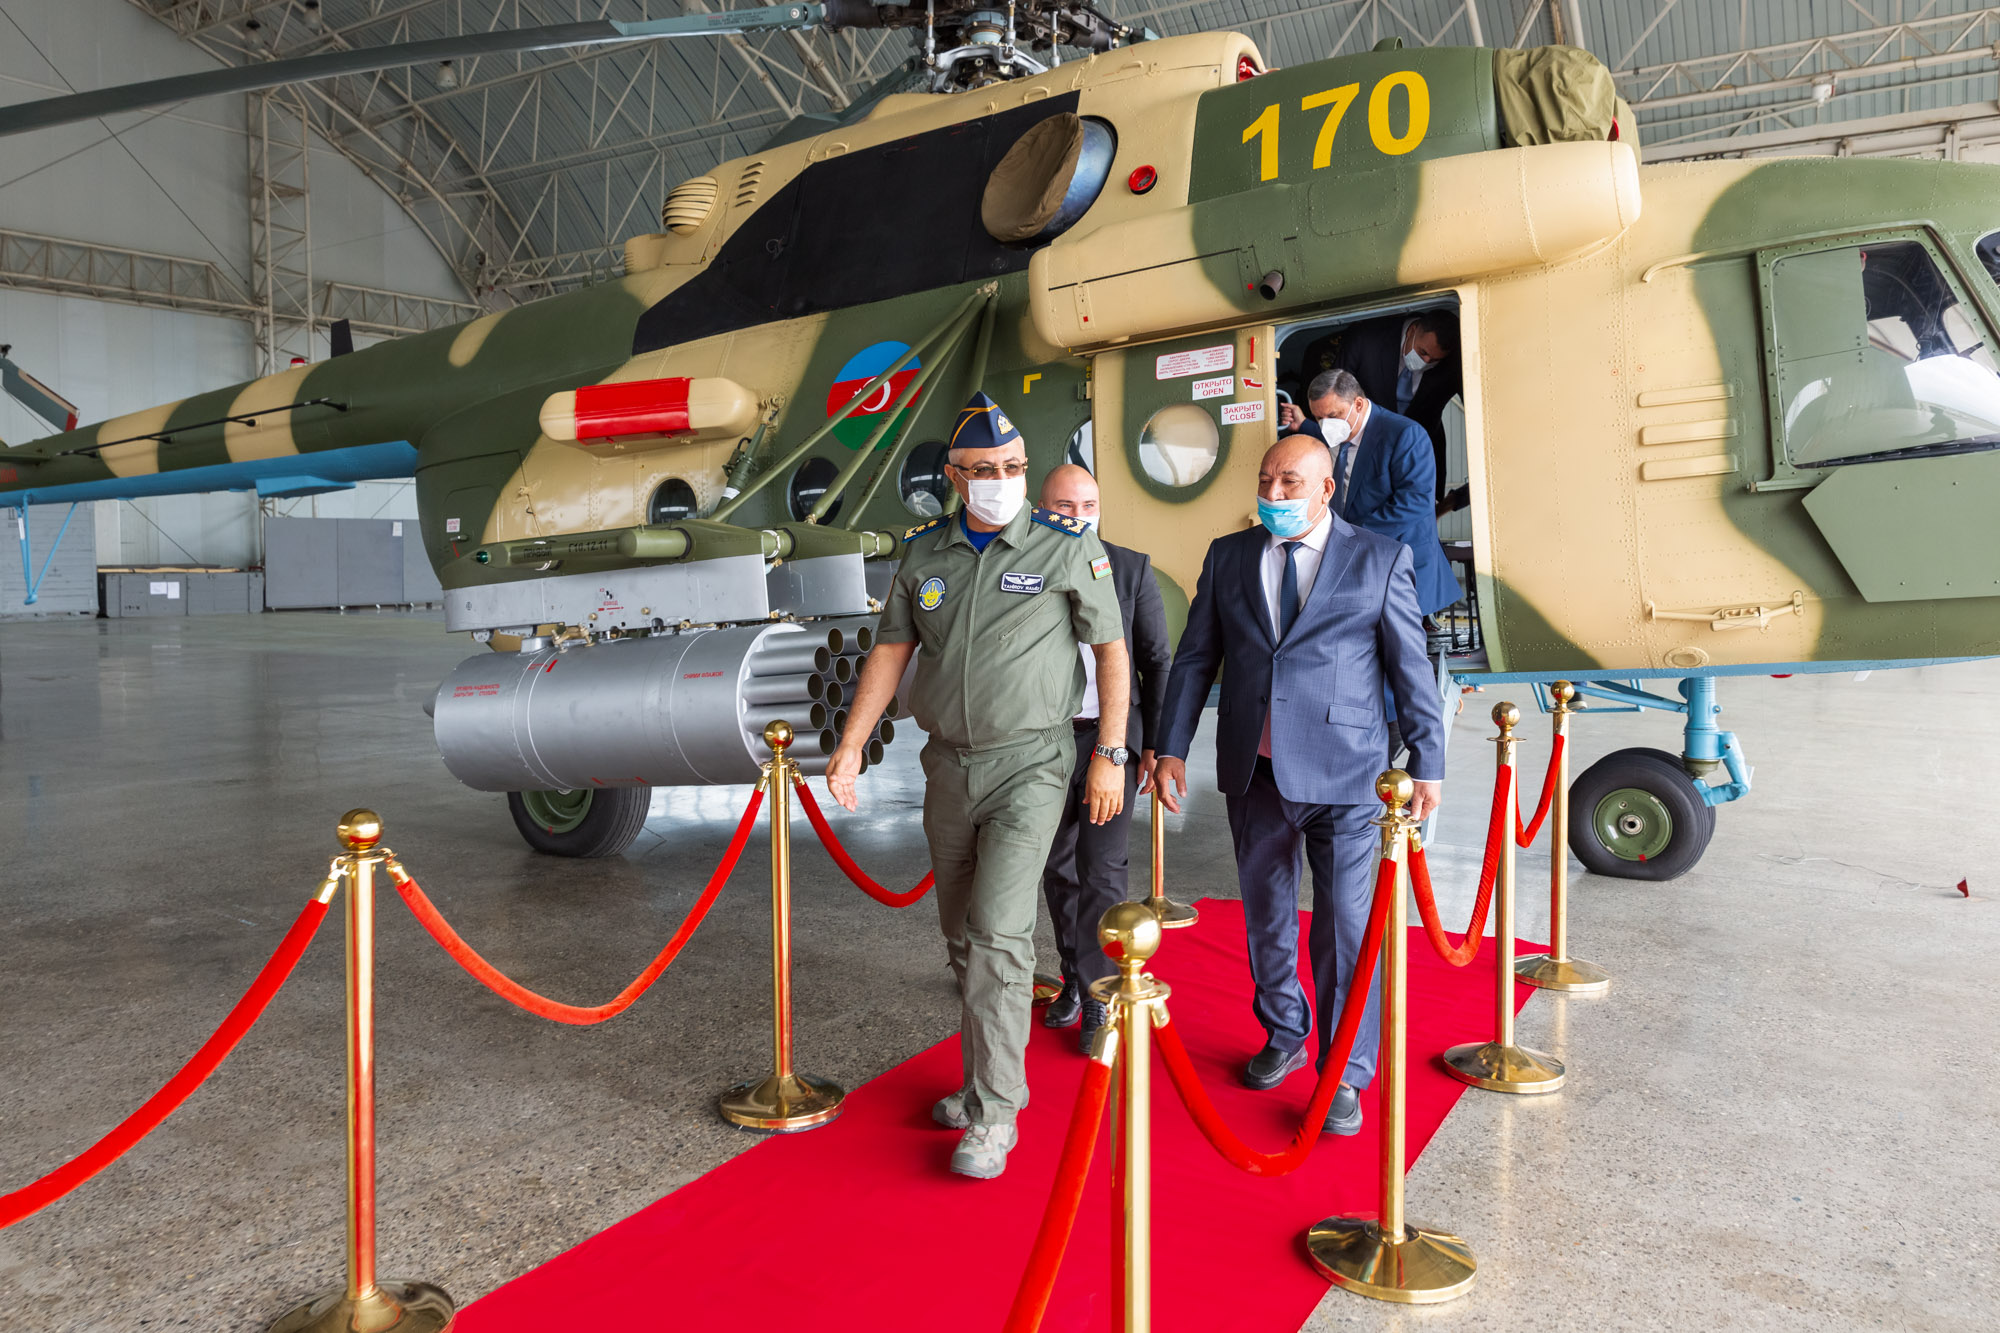 The Overhaul of Another Helicopter Completed in Azerbaijan